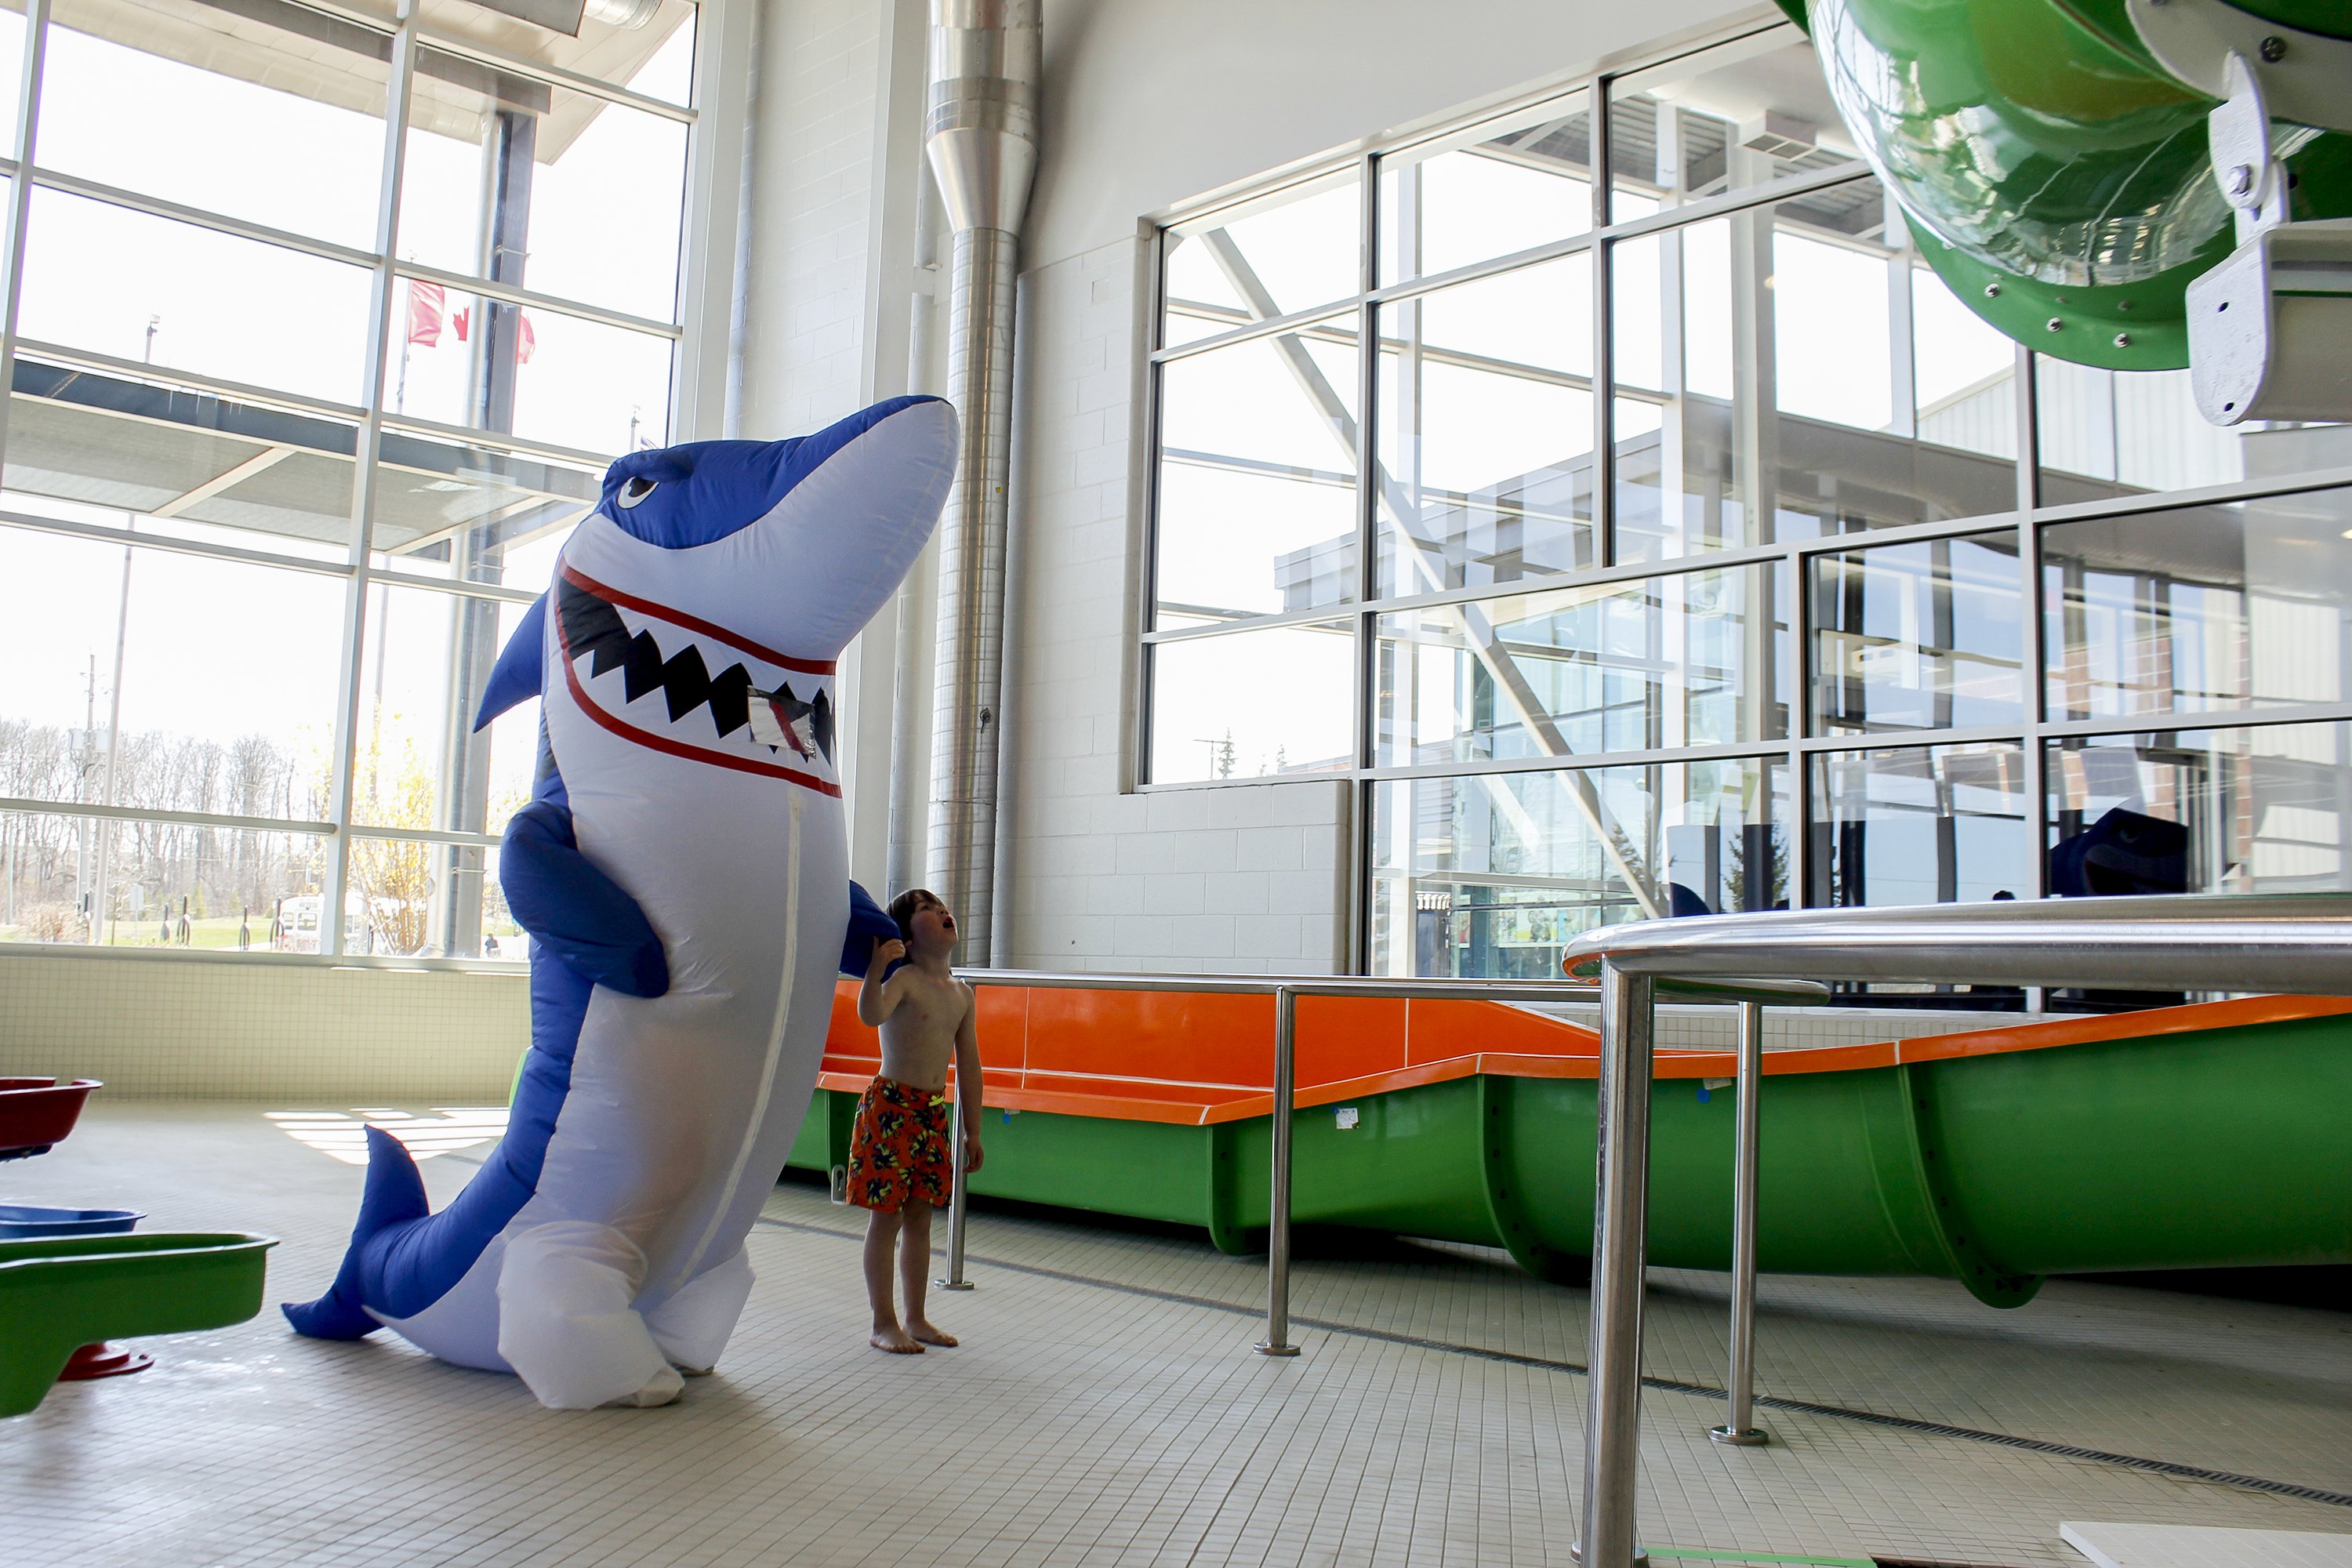 A Shark Costume standing beside a little boy staring up at the water slide